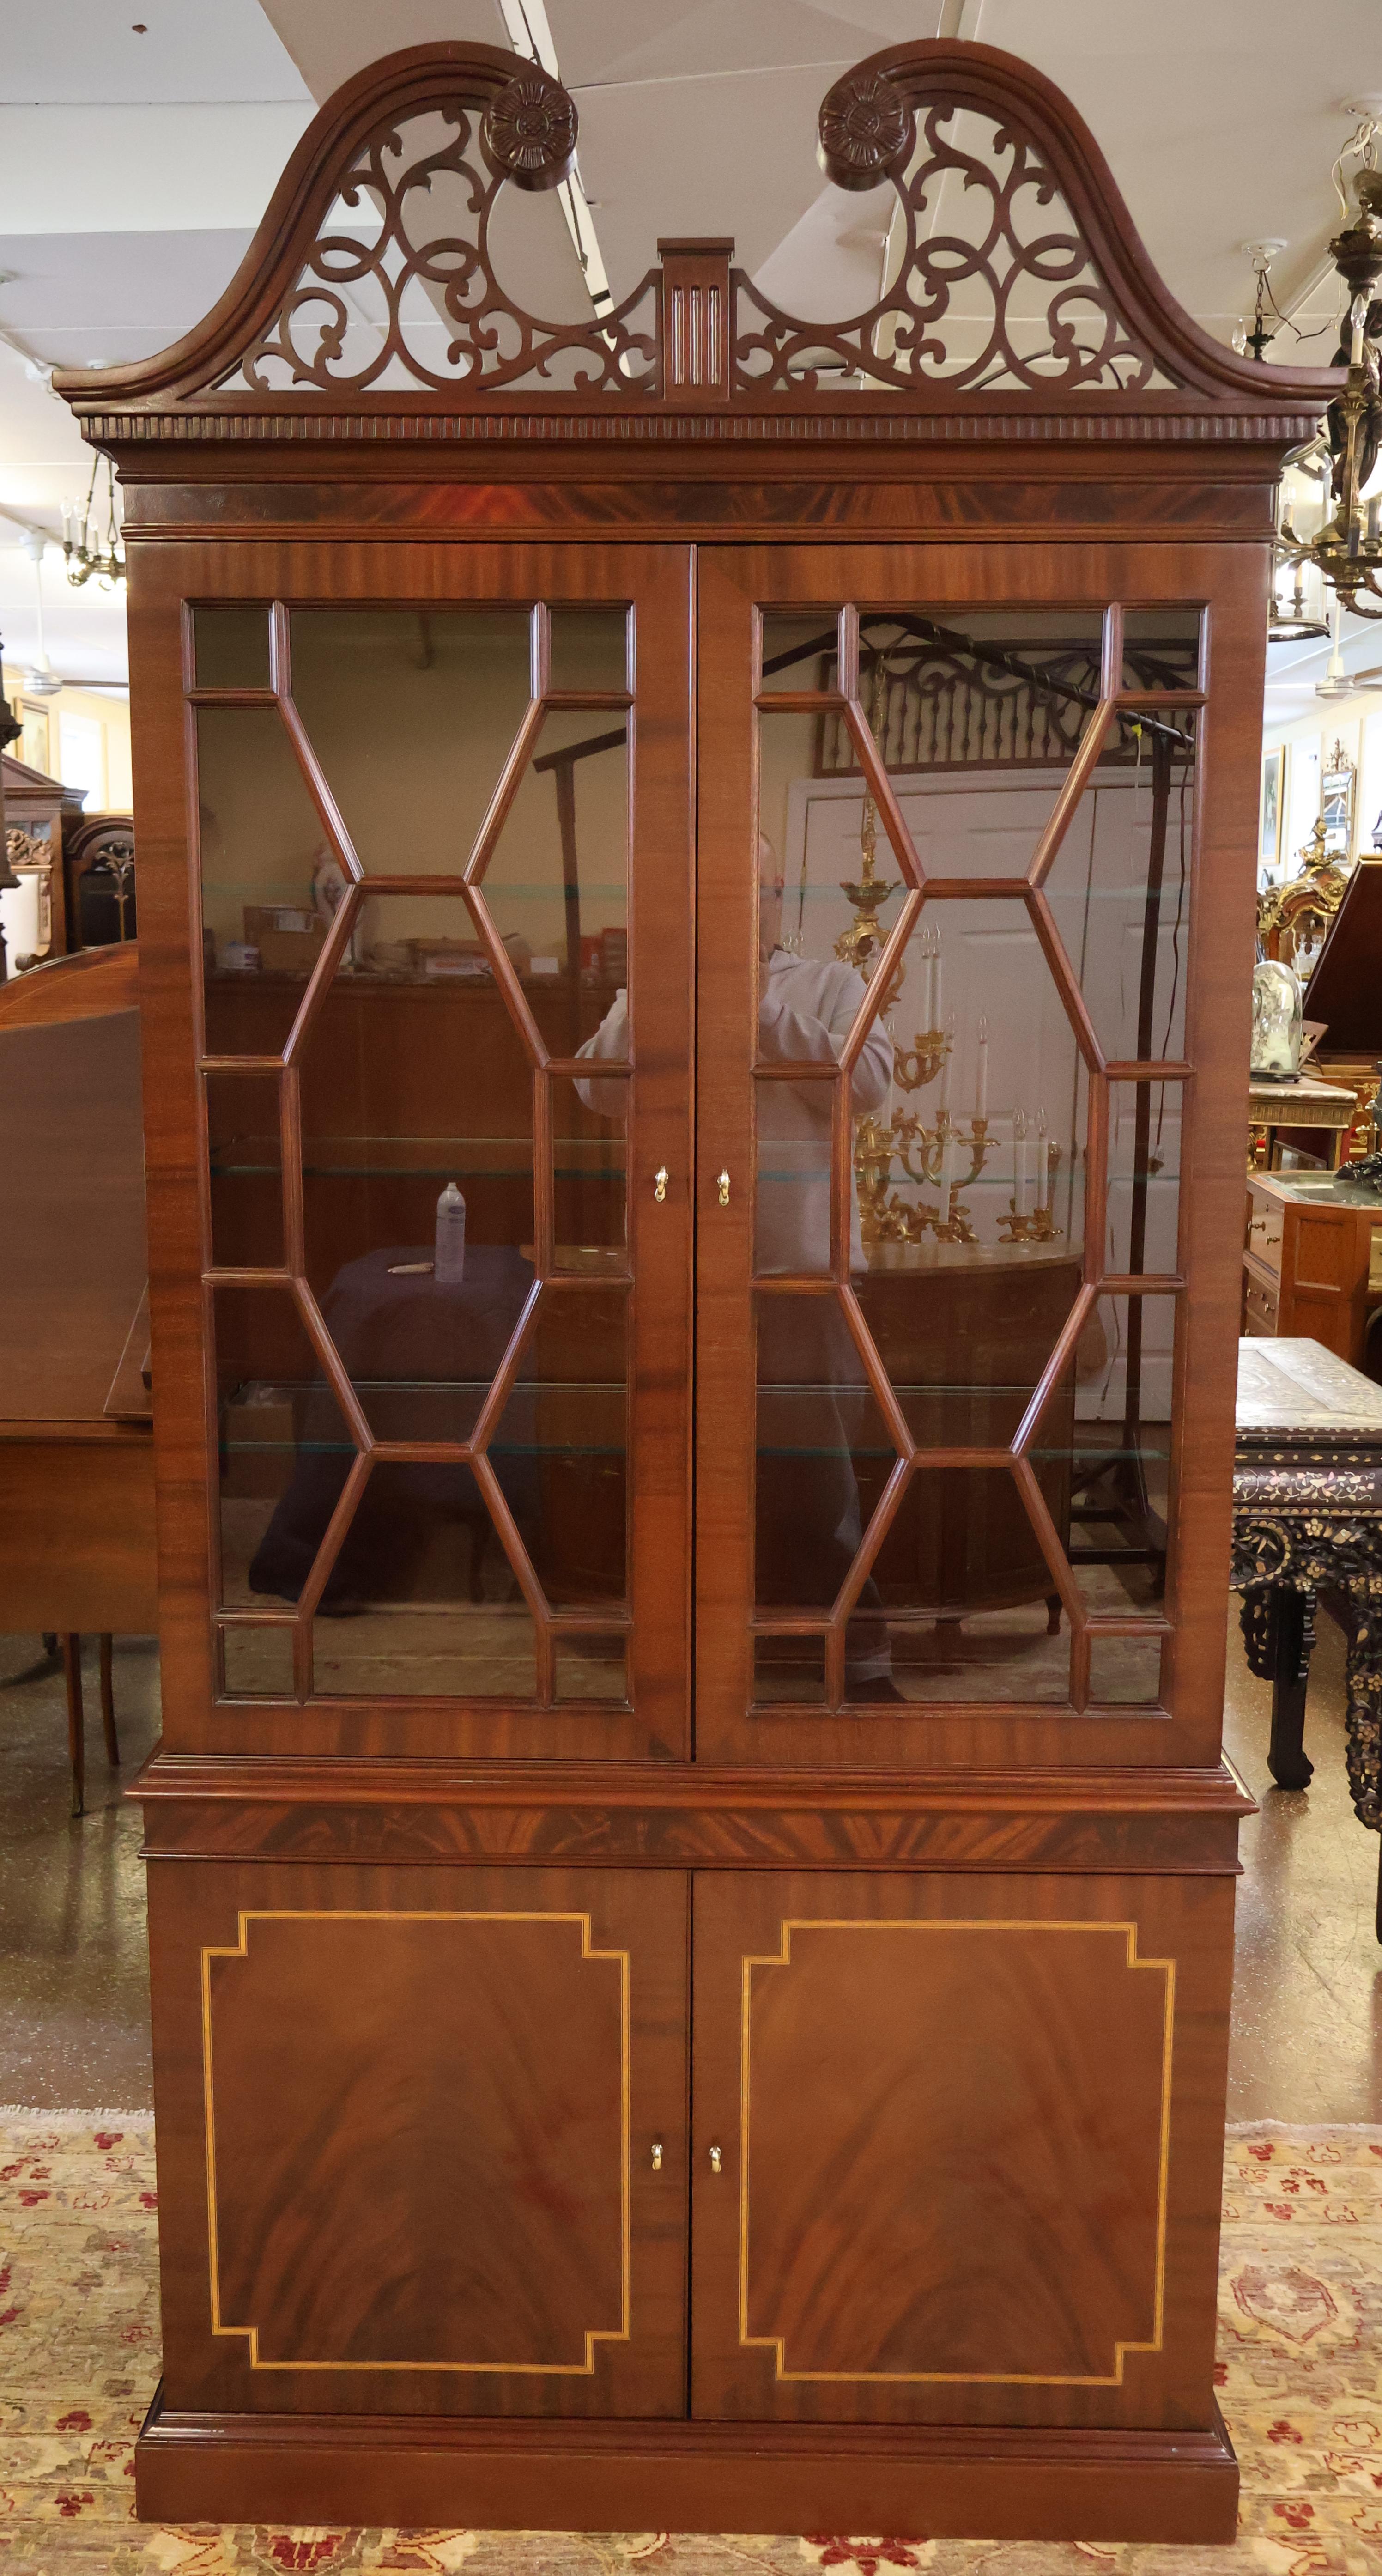 Councill Craftsman Regency Style Flame Mahogany Curio China Display Cabinet

Dimensions : 92.5